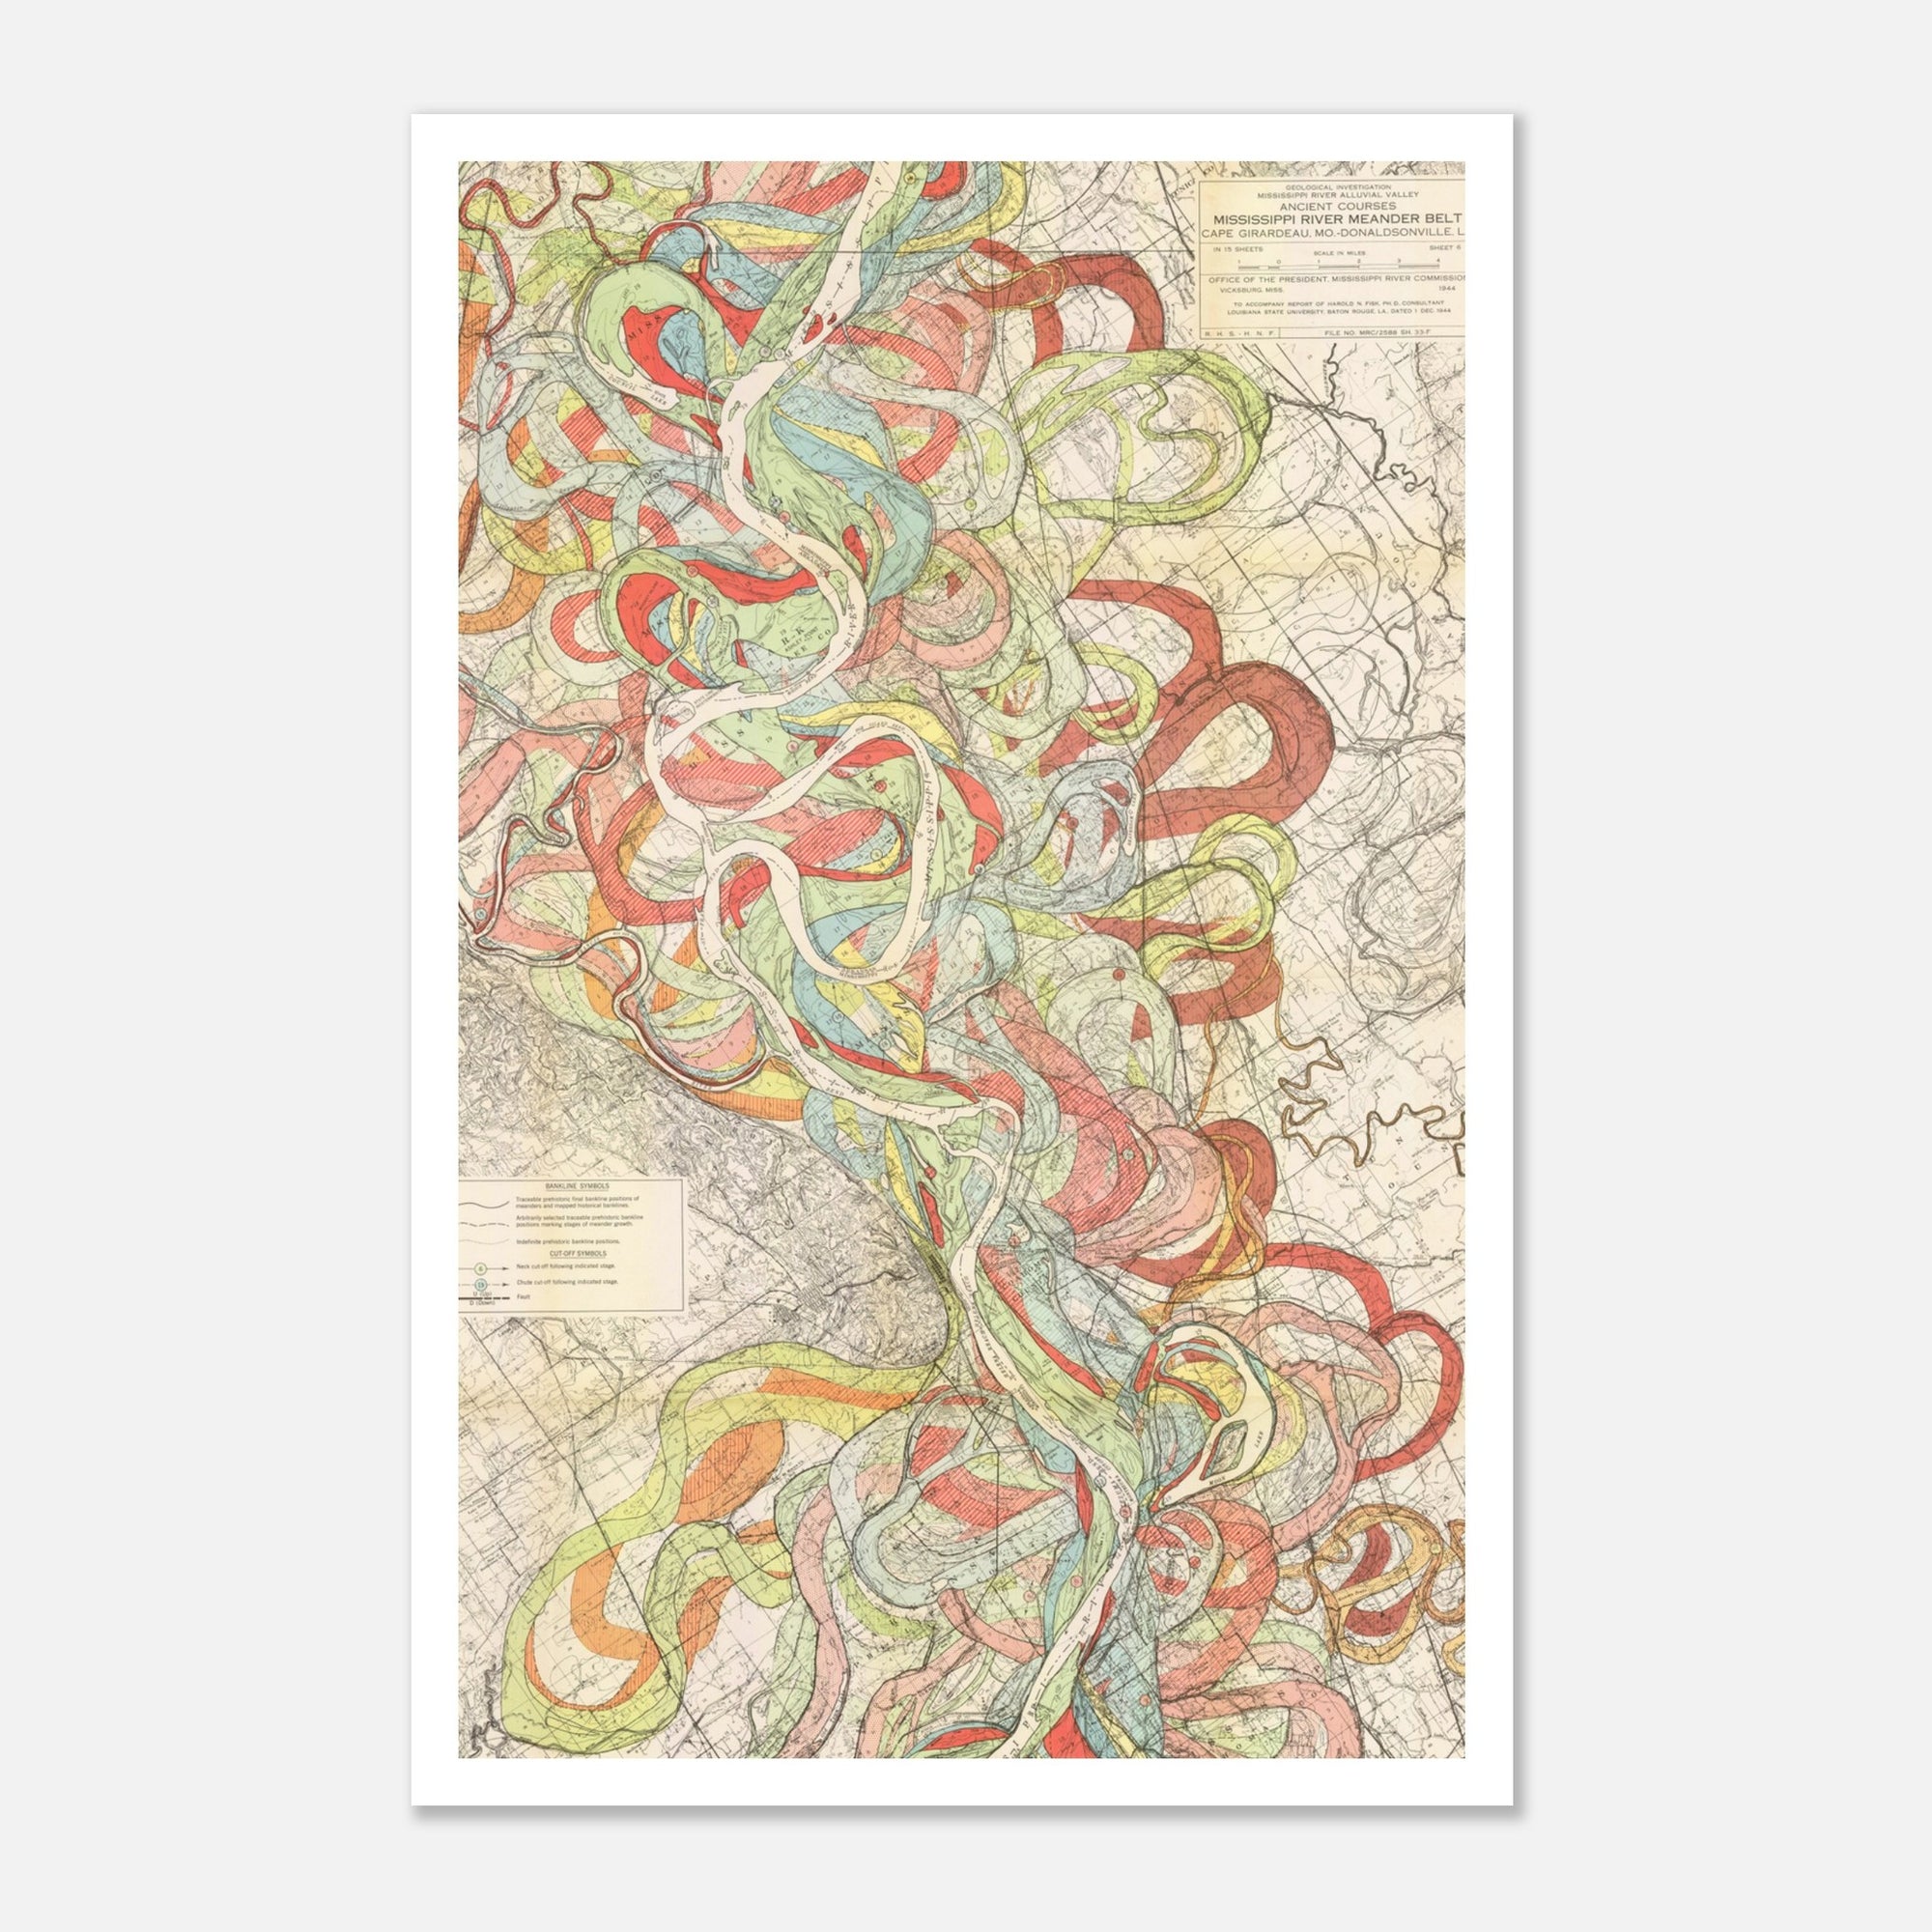 abstract squiggly lines in muted colors on vintage map